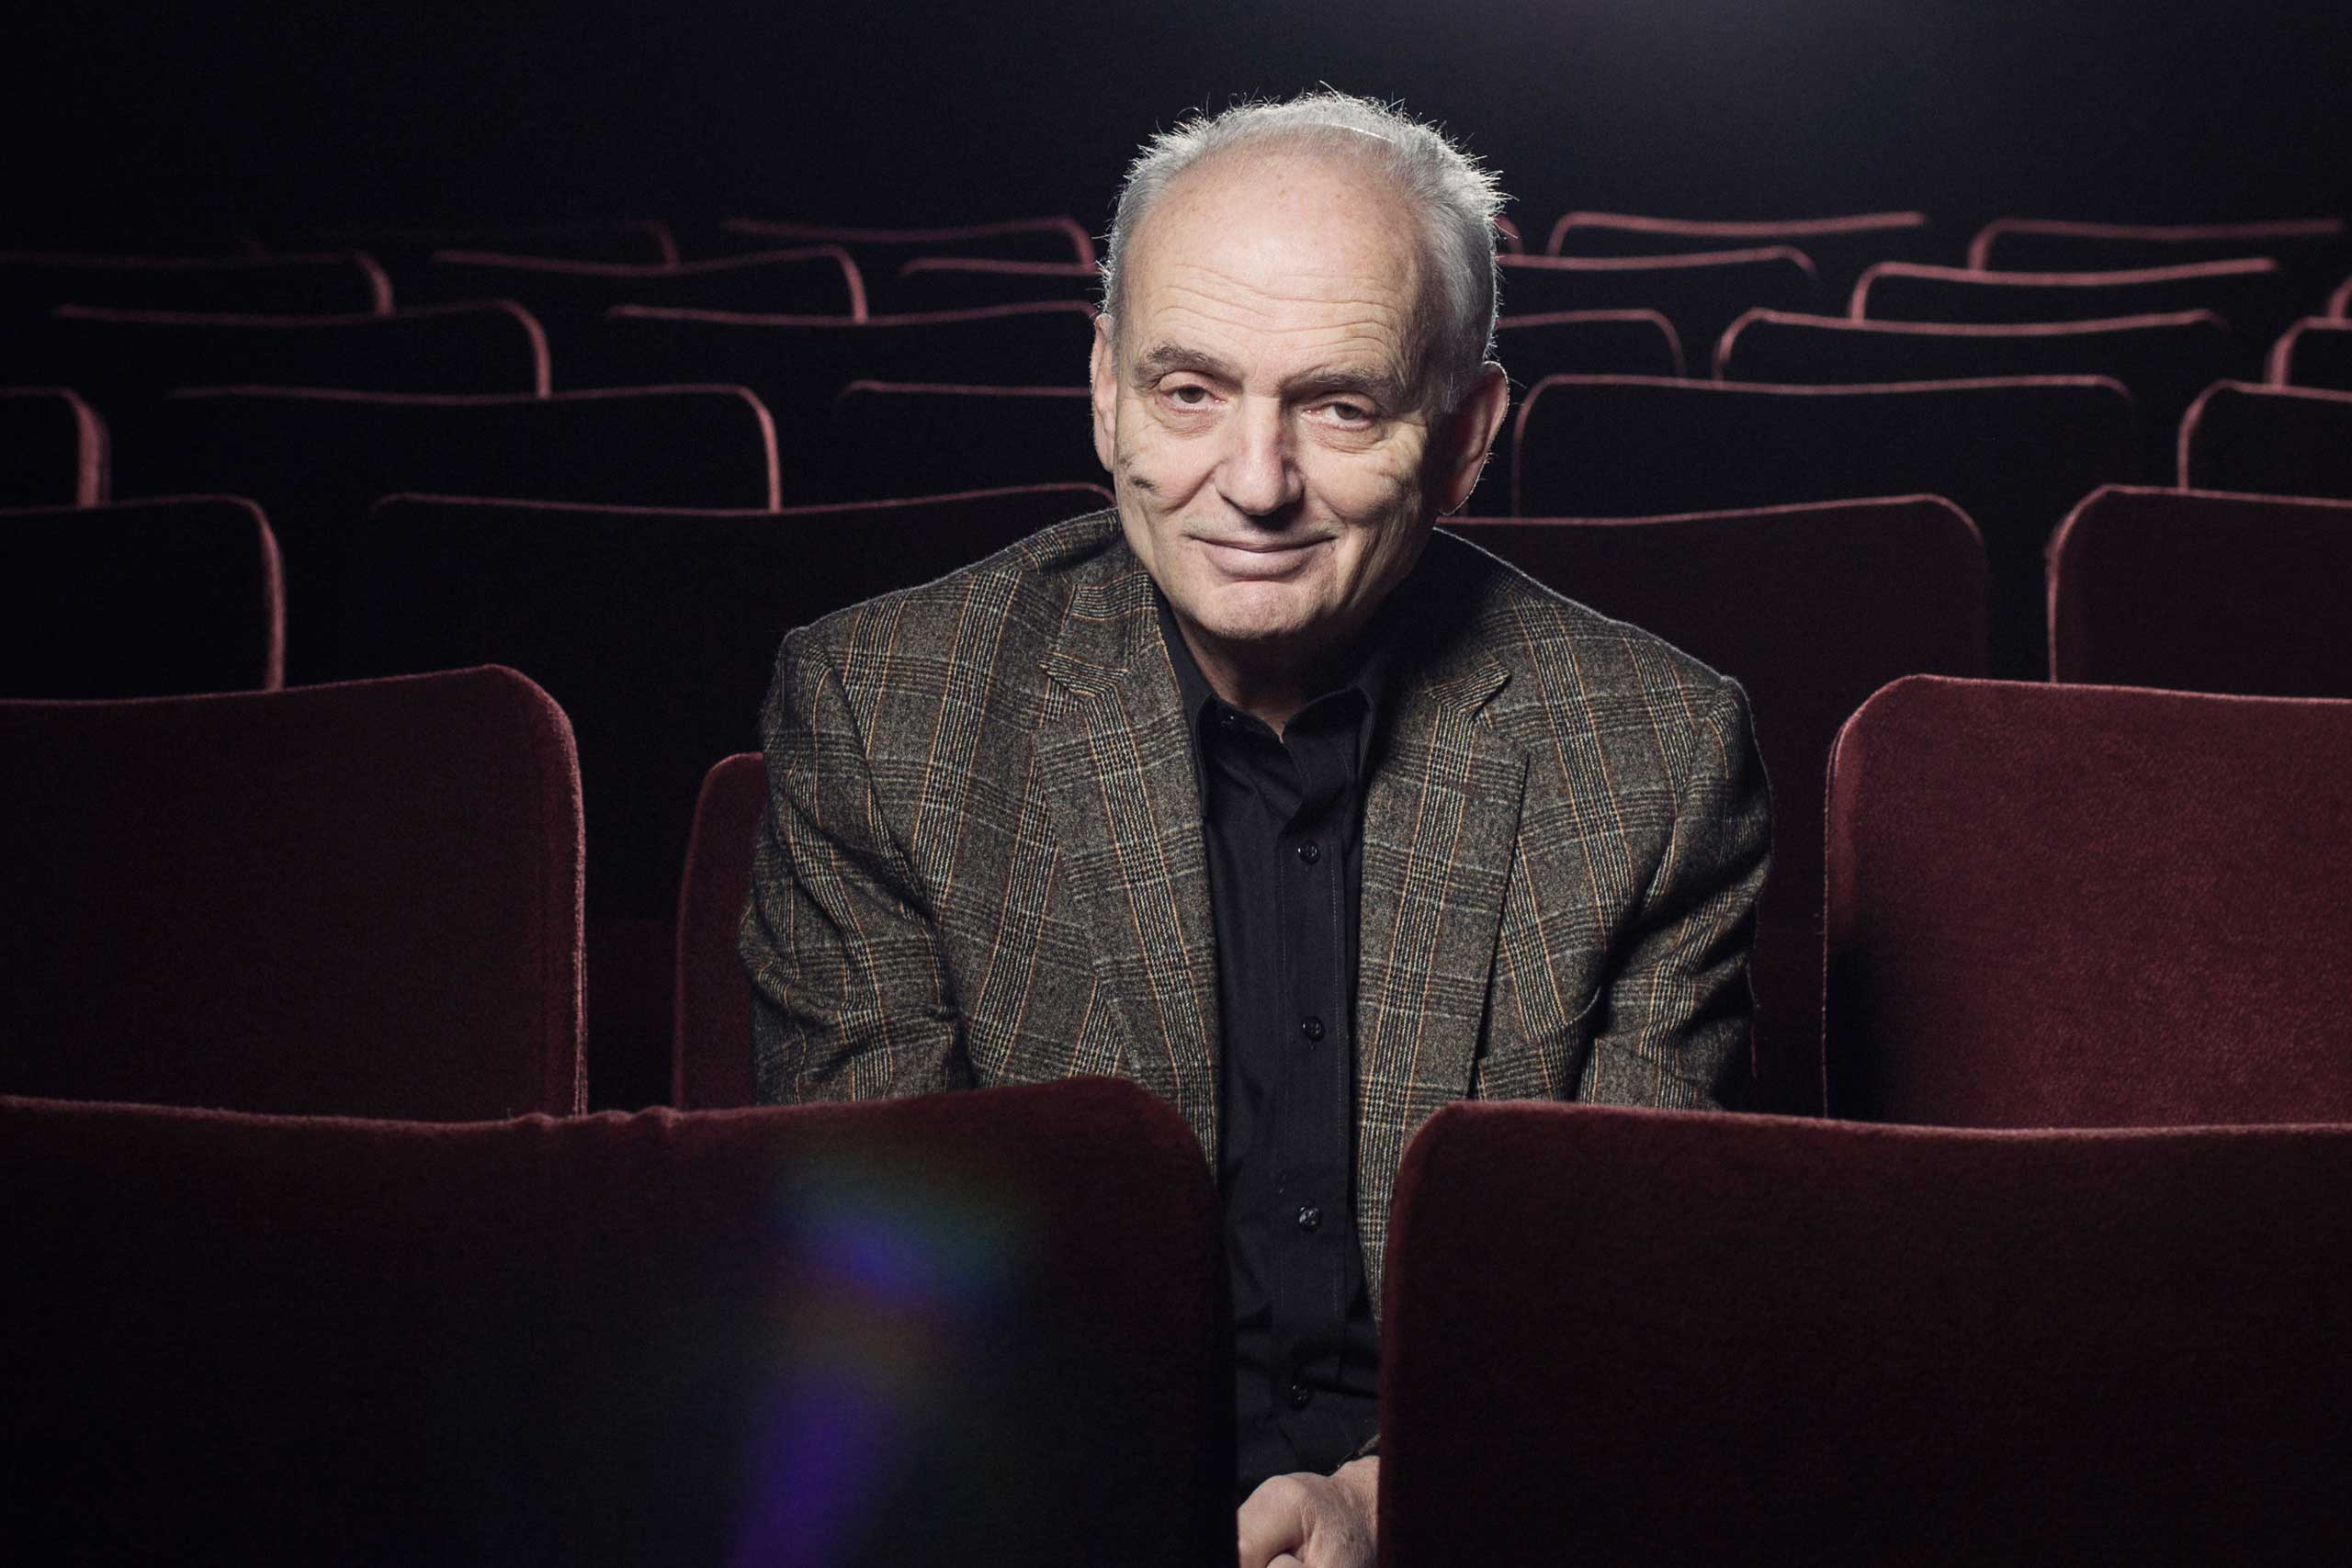 Sopranos Creator David Chase New Movie The Many Saints of Newark in theaters?